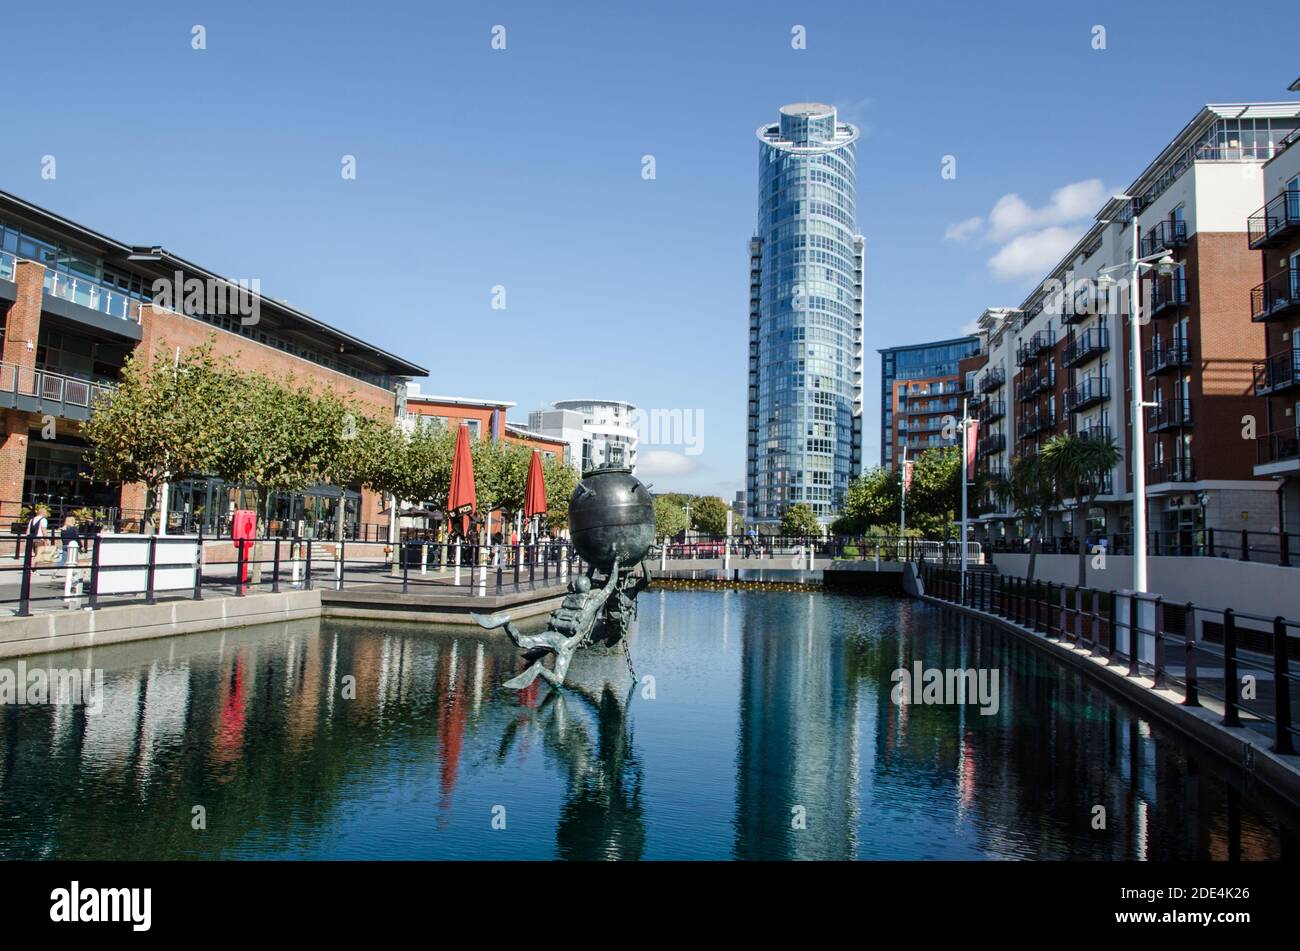 Portsmouth, UK - September 8, 2020: View along one of the converted docks at Gunwharf Quays, Portsmouth with the Vernon Monument to Royal Navy divers Stock Photo